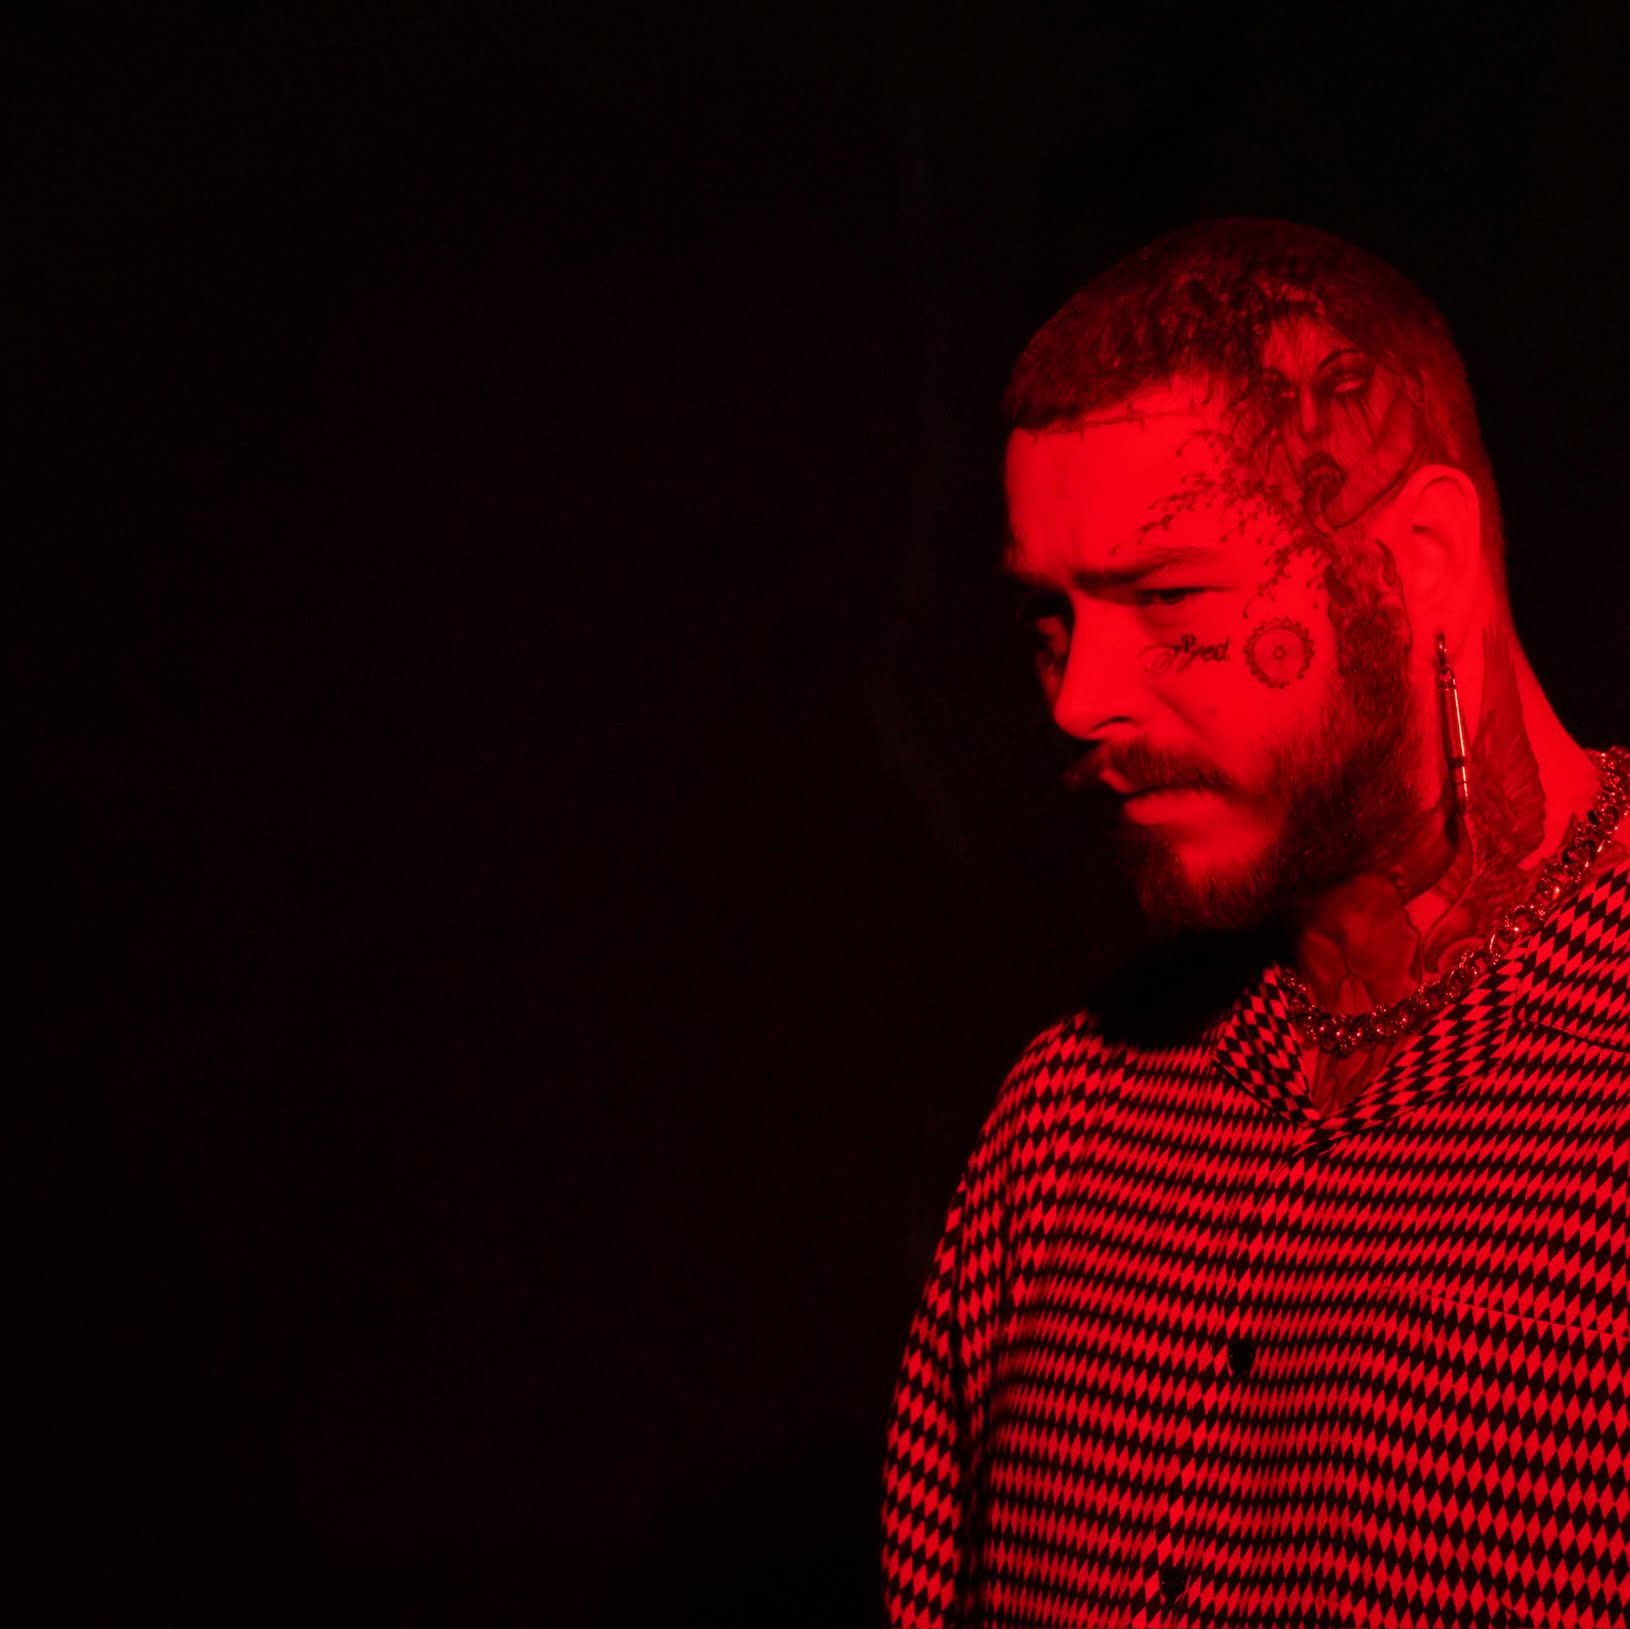 Post Malone releases Mourning via 360 MAGAZINE.